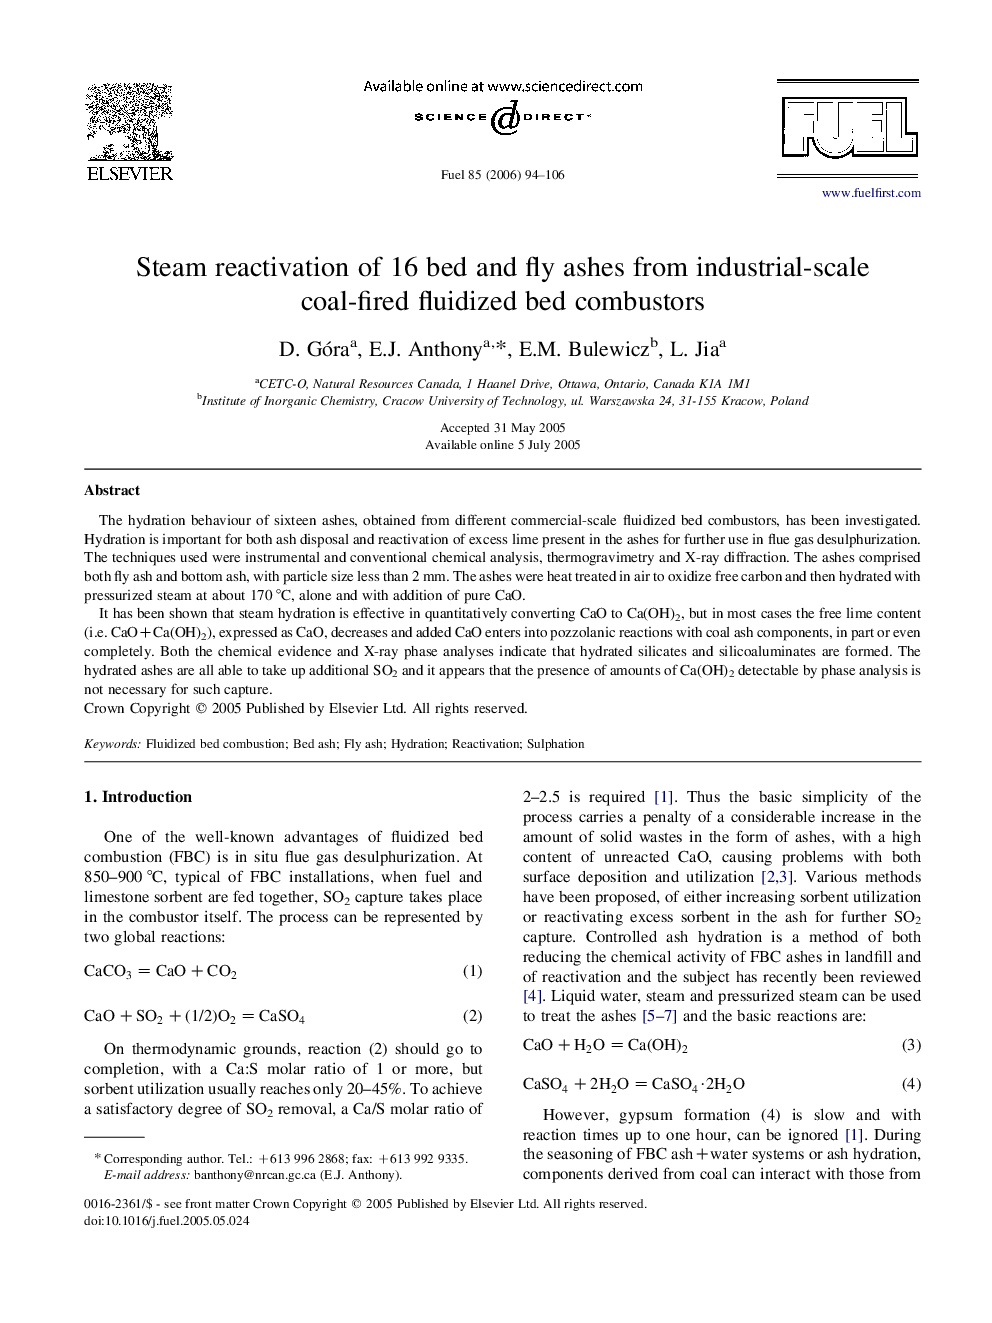 Steam reactivation of 16 bed and fly ashes from industrial-scale coal-fired fluidized bed combustors